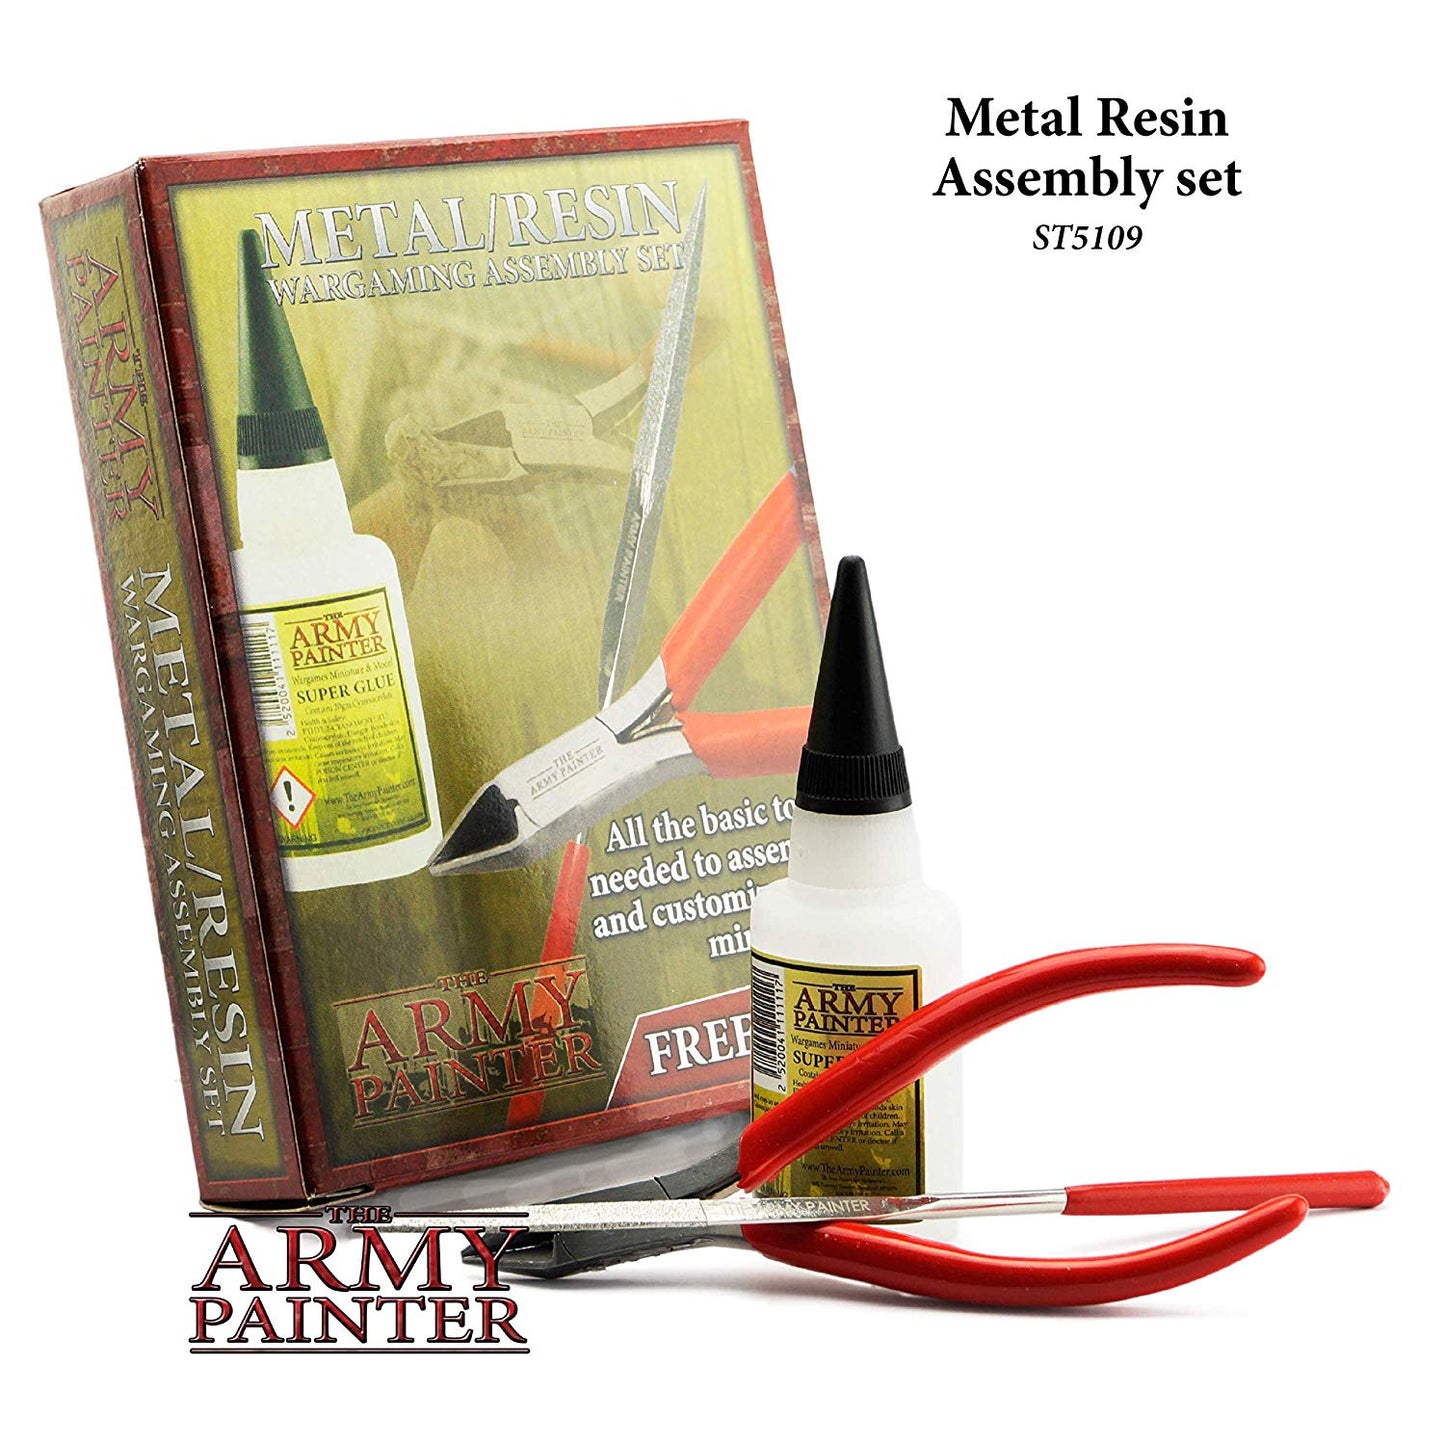 The Army Painter - Metal and Resin Wargaming Assembly Set